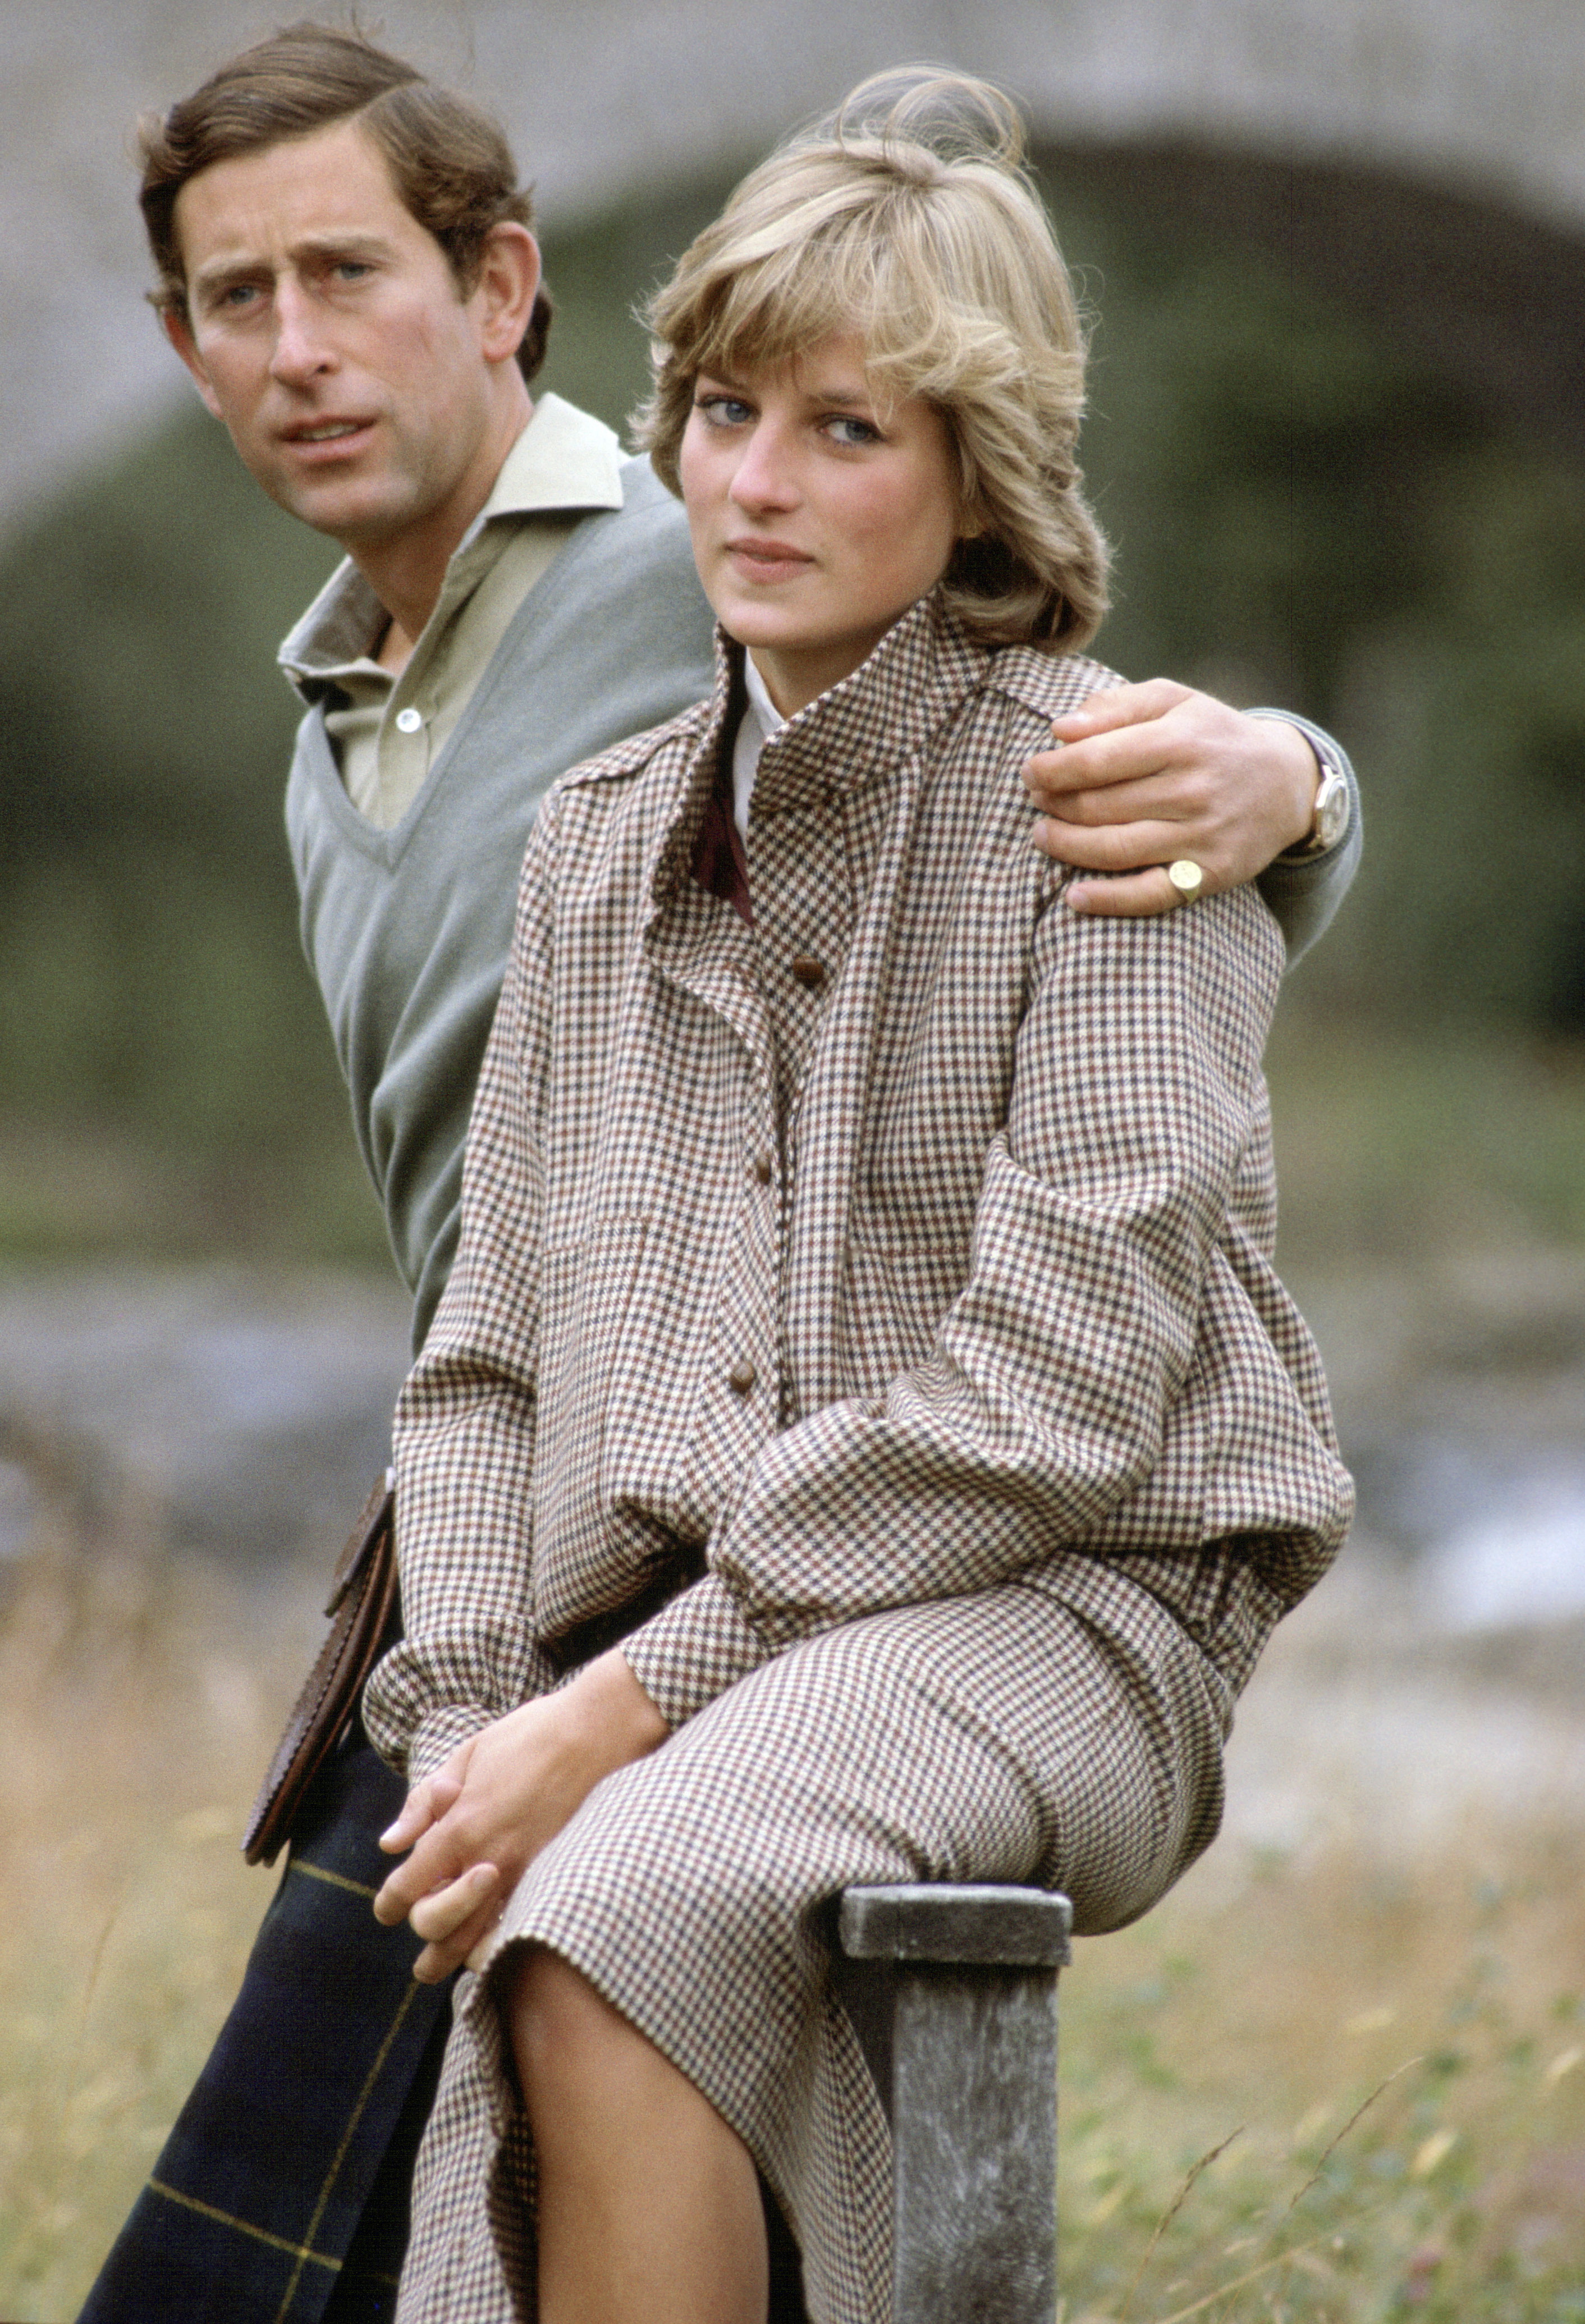 Prince Charles with his arm around Princess Diana during their honeymoon at Balmoral in Scotland